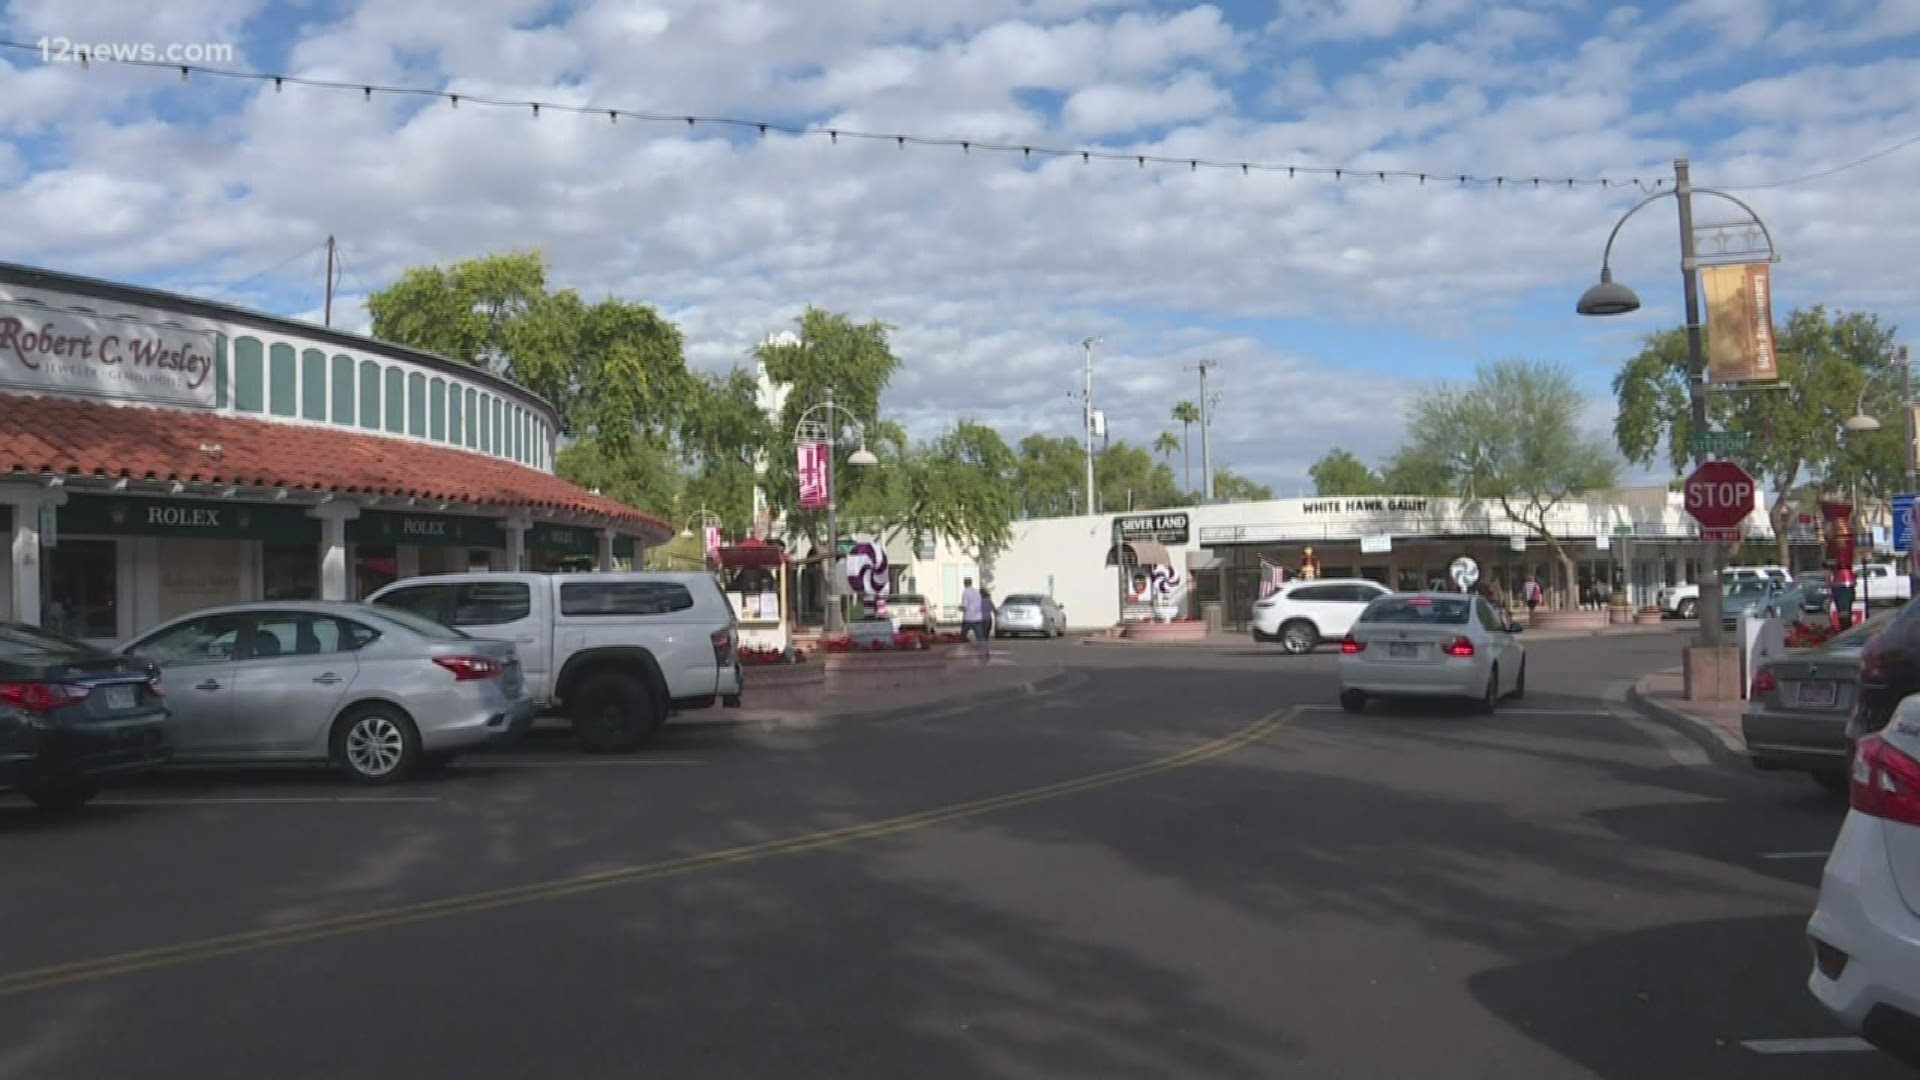 Does a high rise belong in Old Town Scottsdale? Business owners are worried about ruining the feeling of the area.